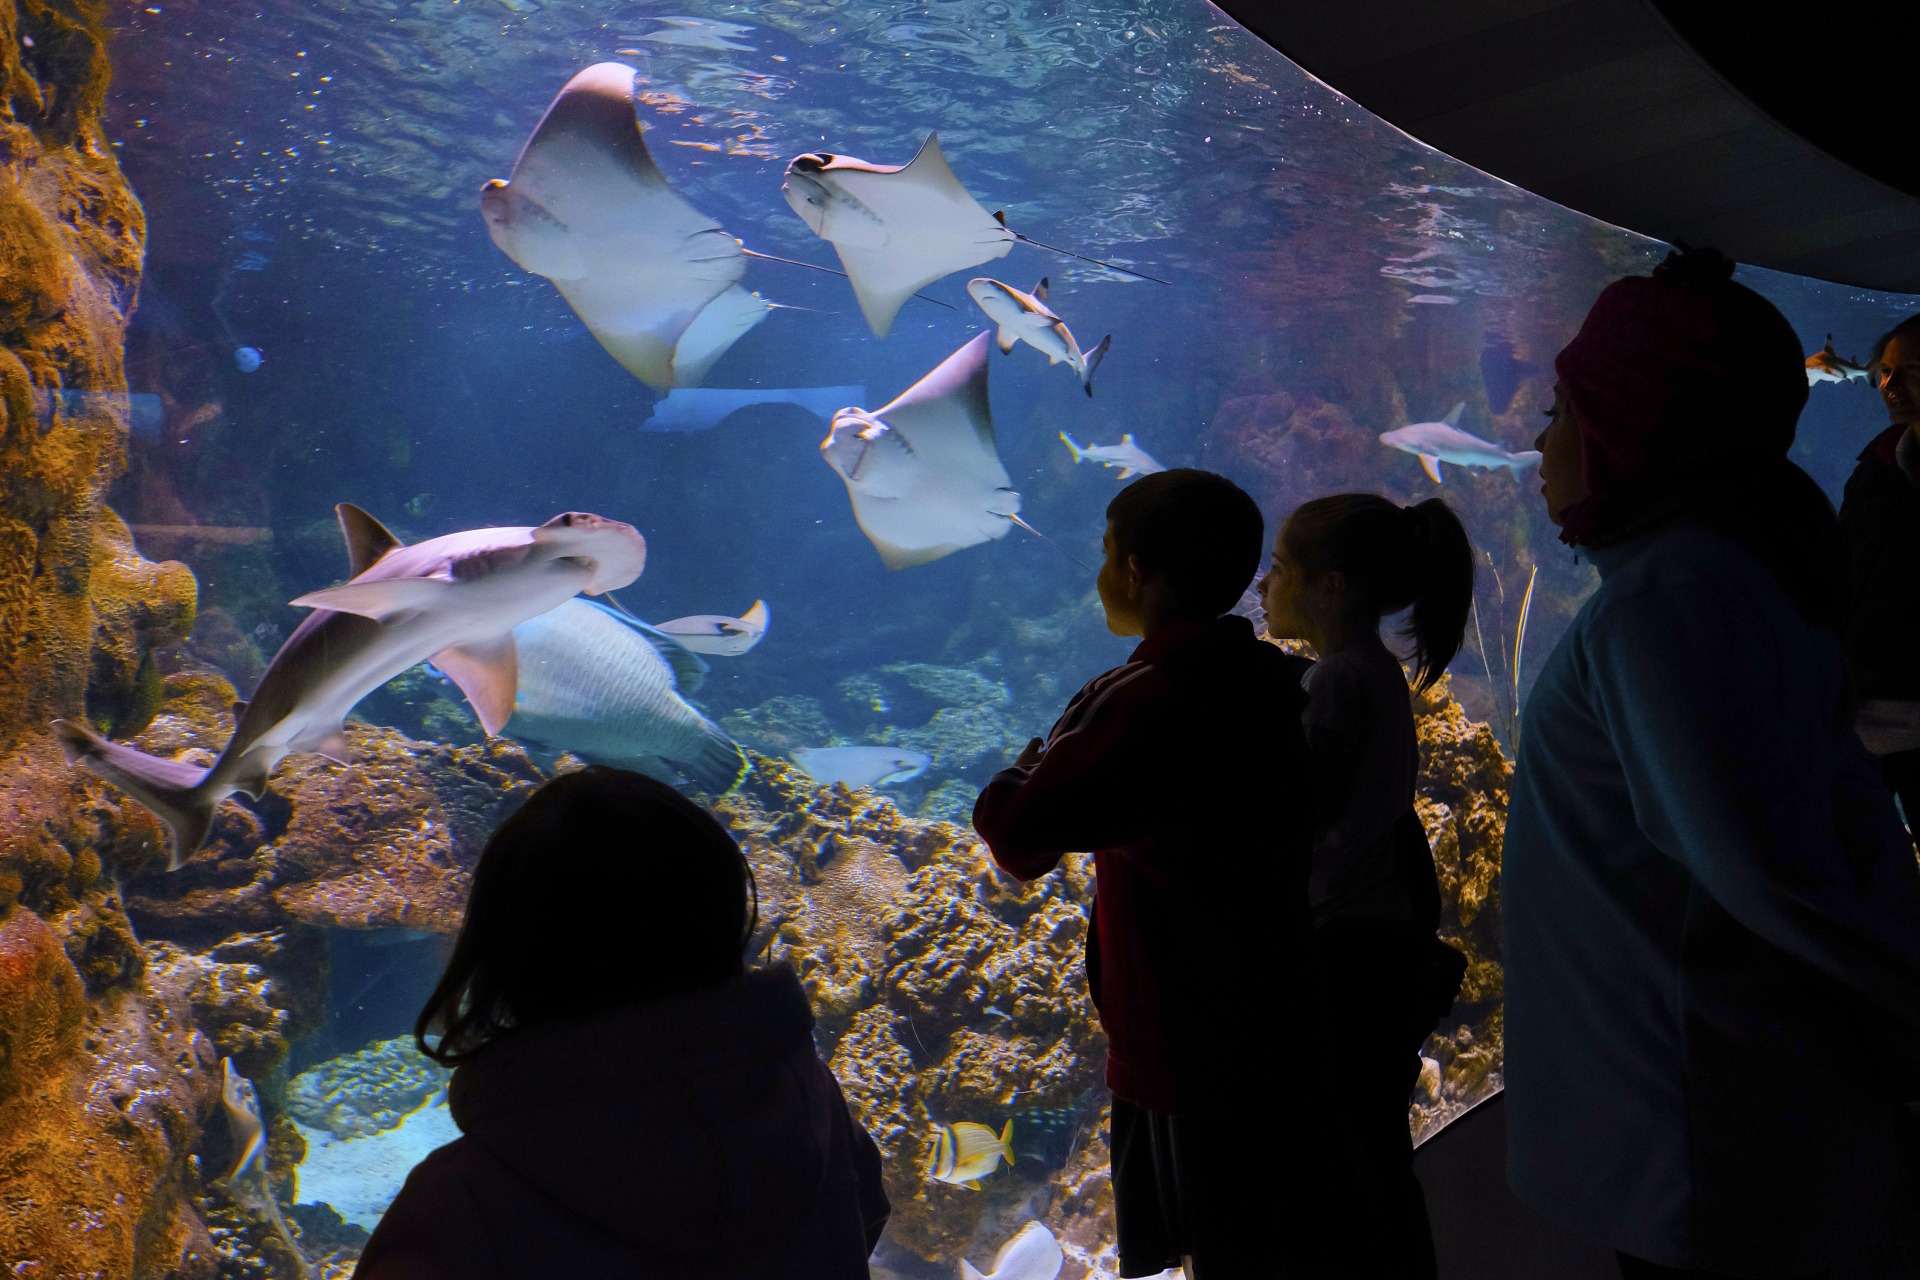 Kids looking through the glass at the fish and sharks swimming at the aquarium